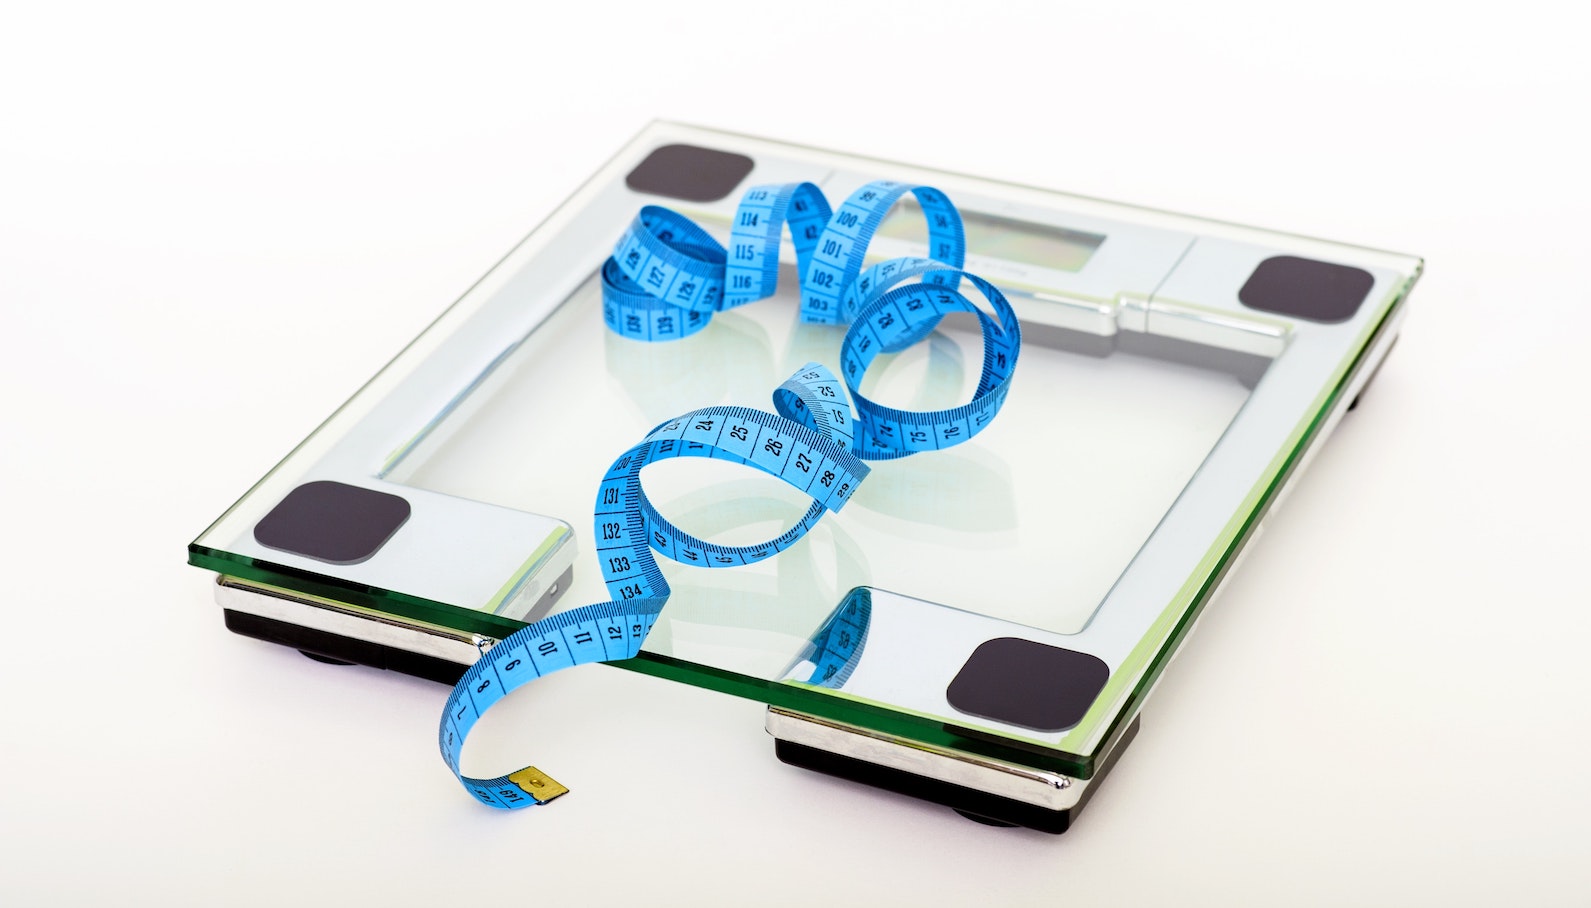 Transparent, clear scale on the floor with a blue tape measure curled on top of it